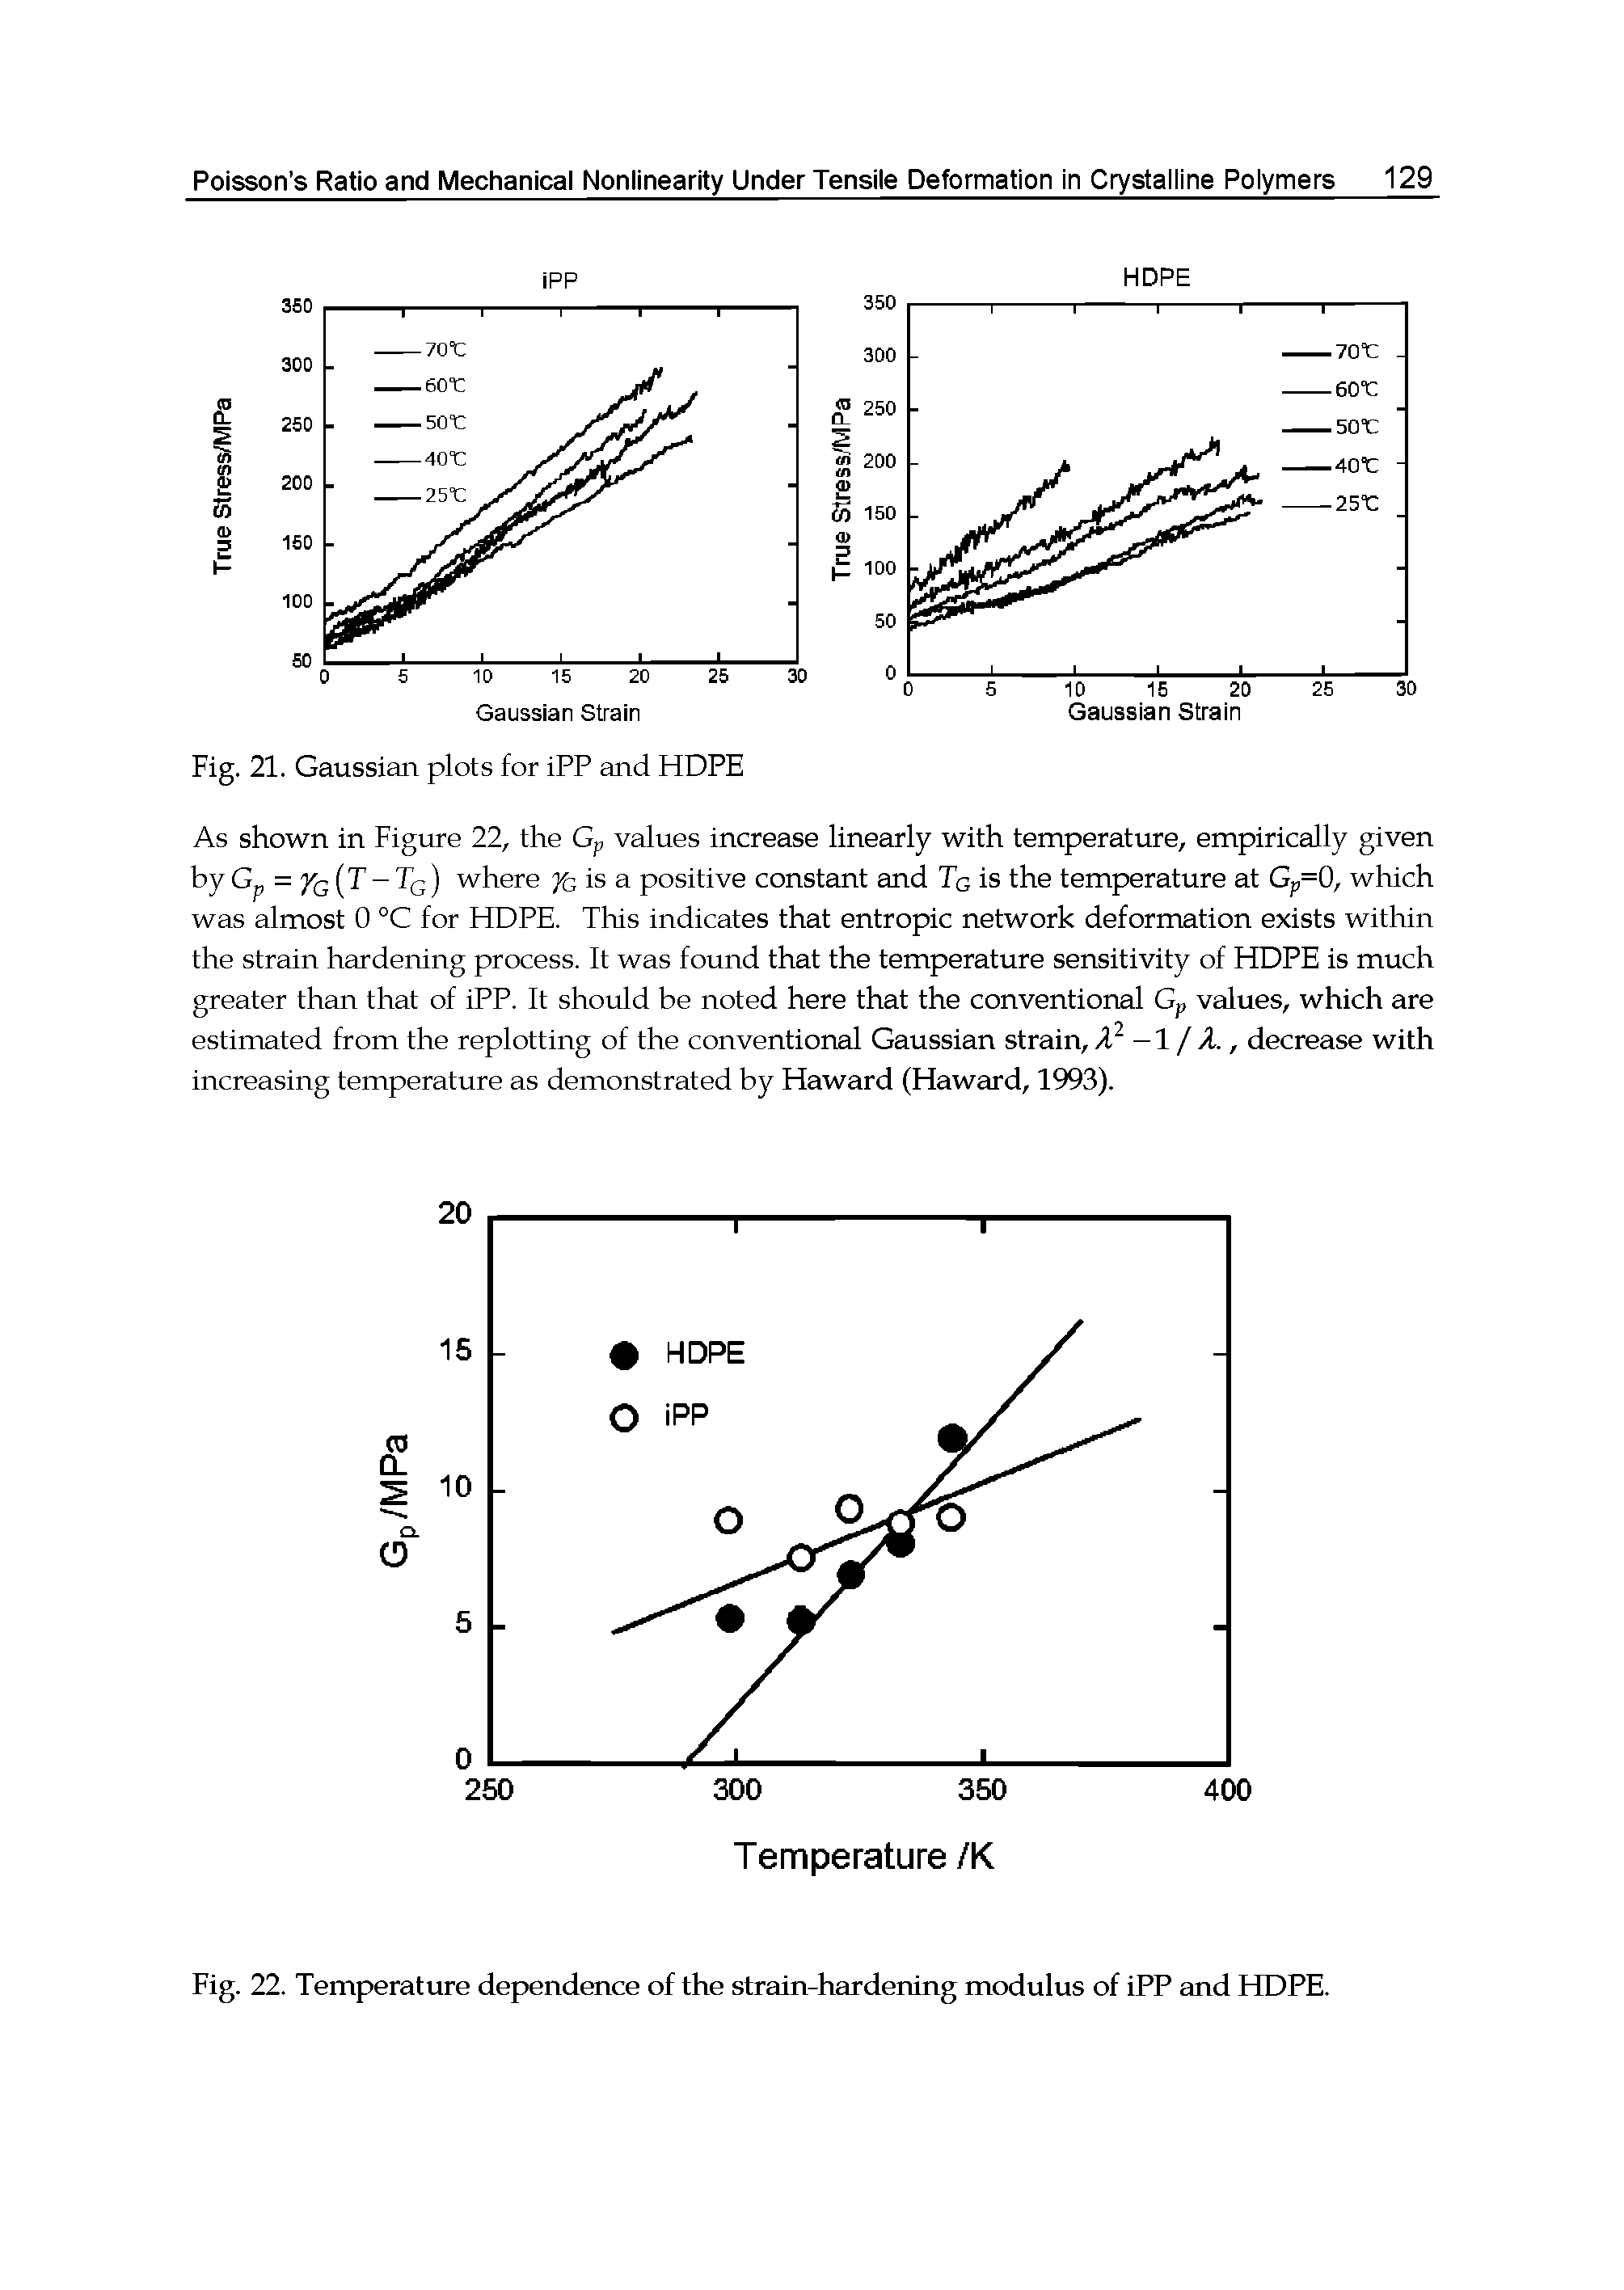 Fig. 22. Temperature dependence of the strain-hardening modulus of iPP and HOPE.